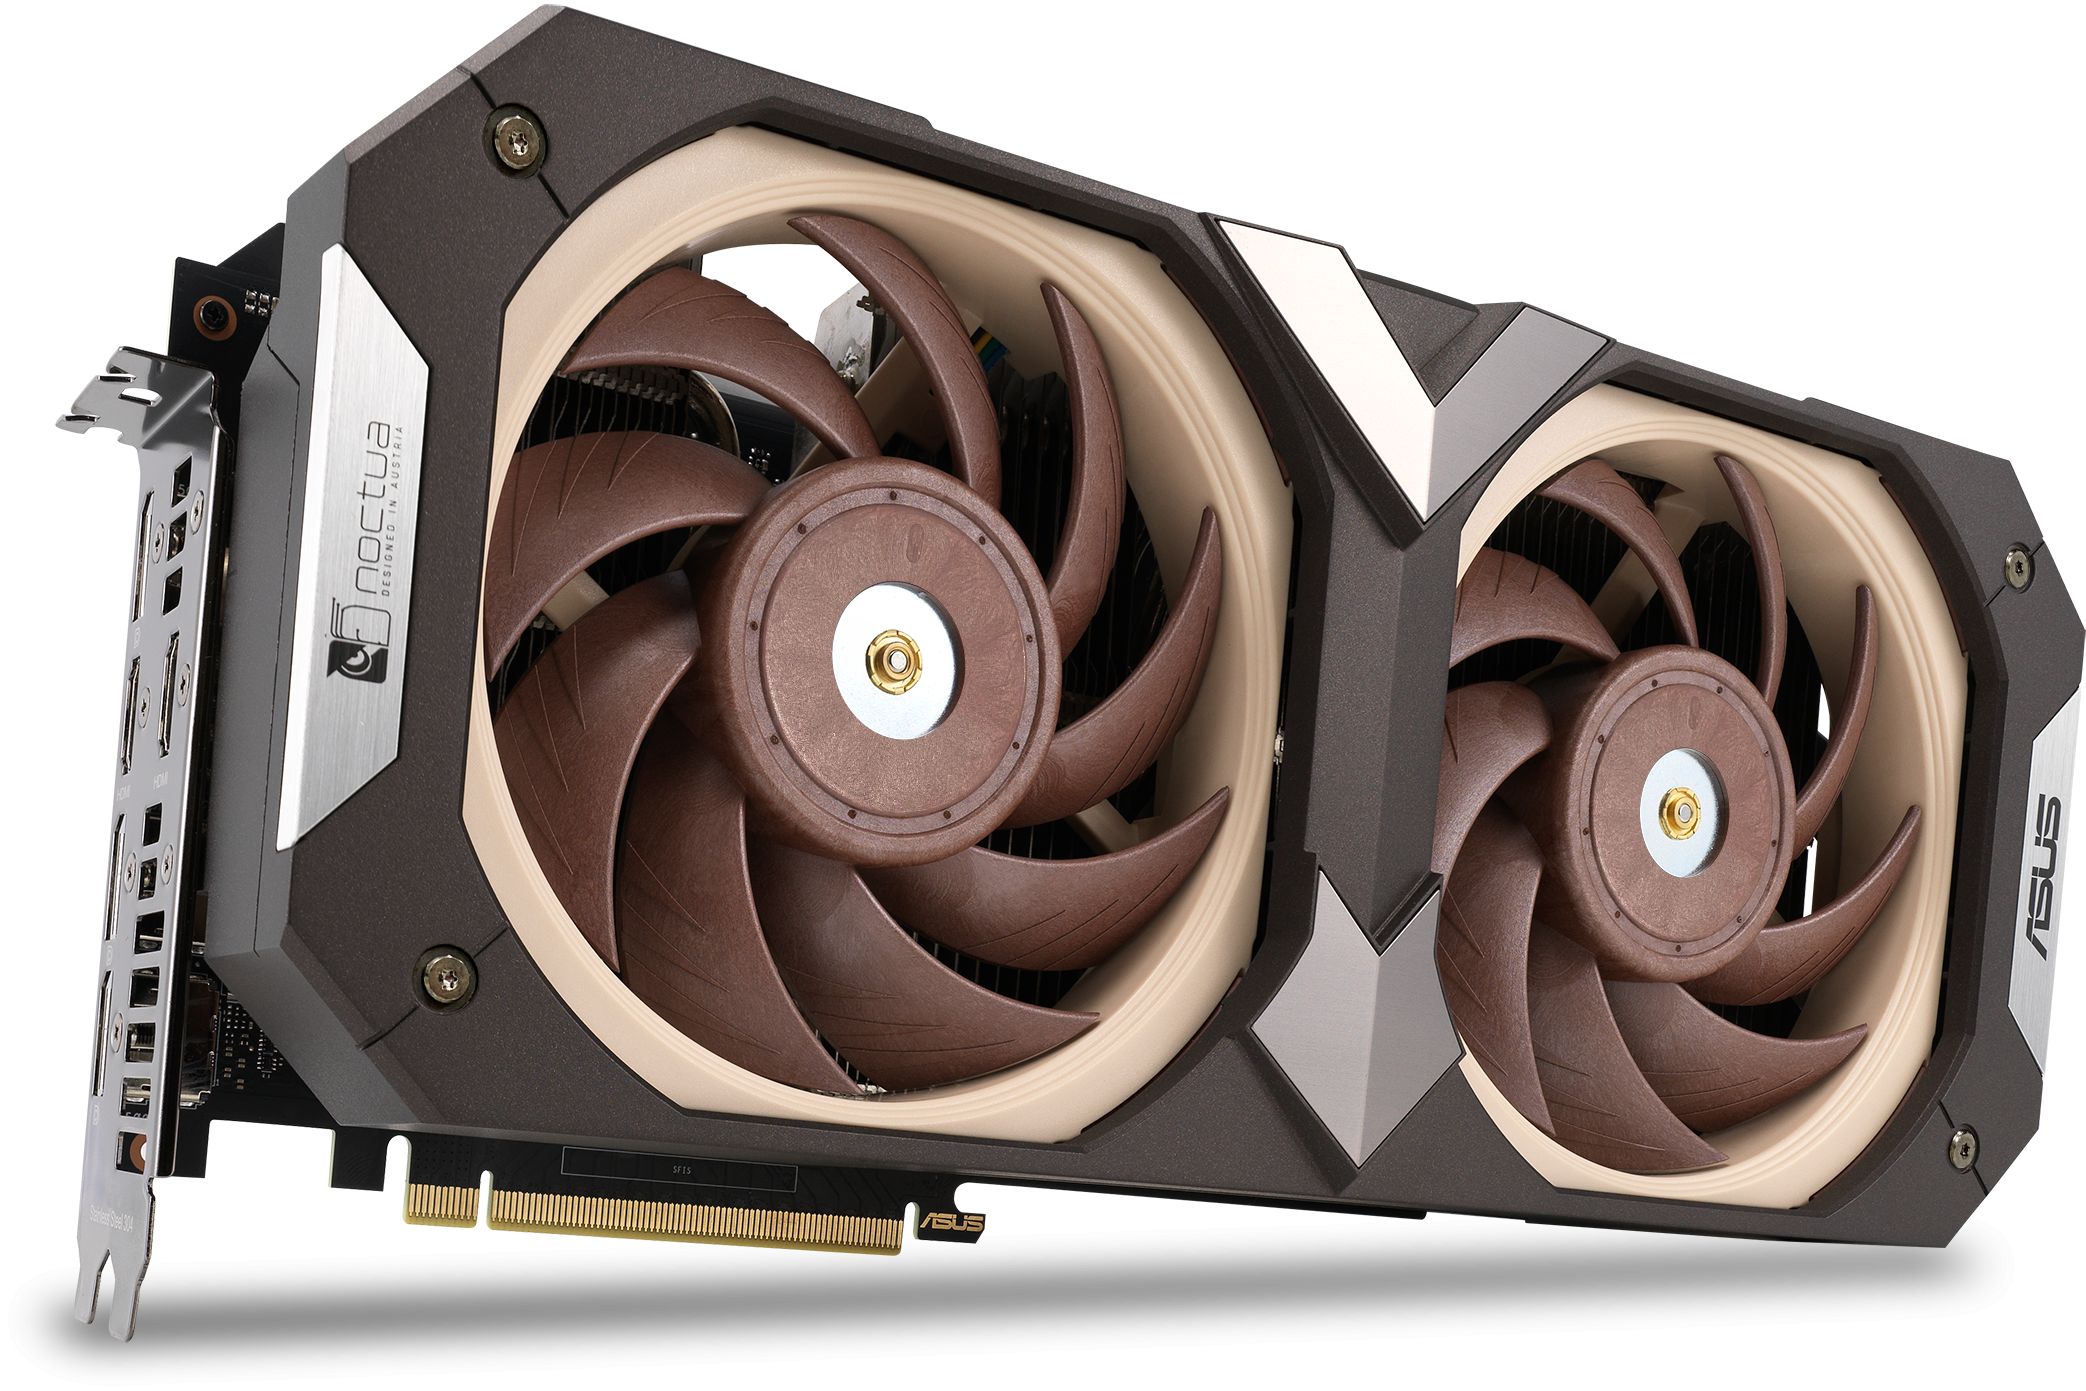 RTX 4080 Noctua Edition is out. Great cooler, what about the coils